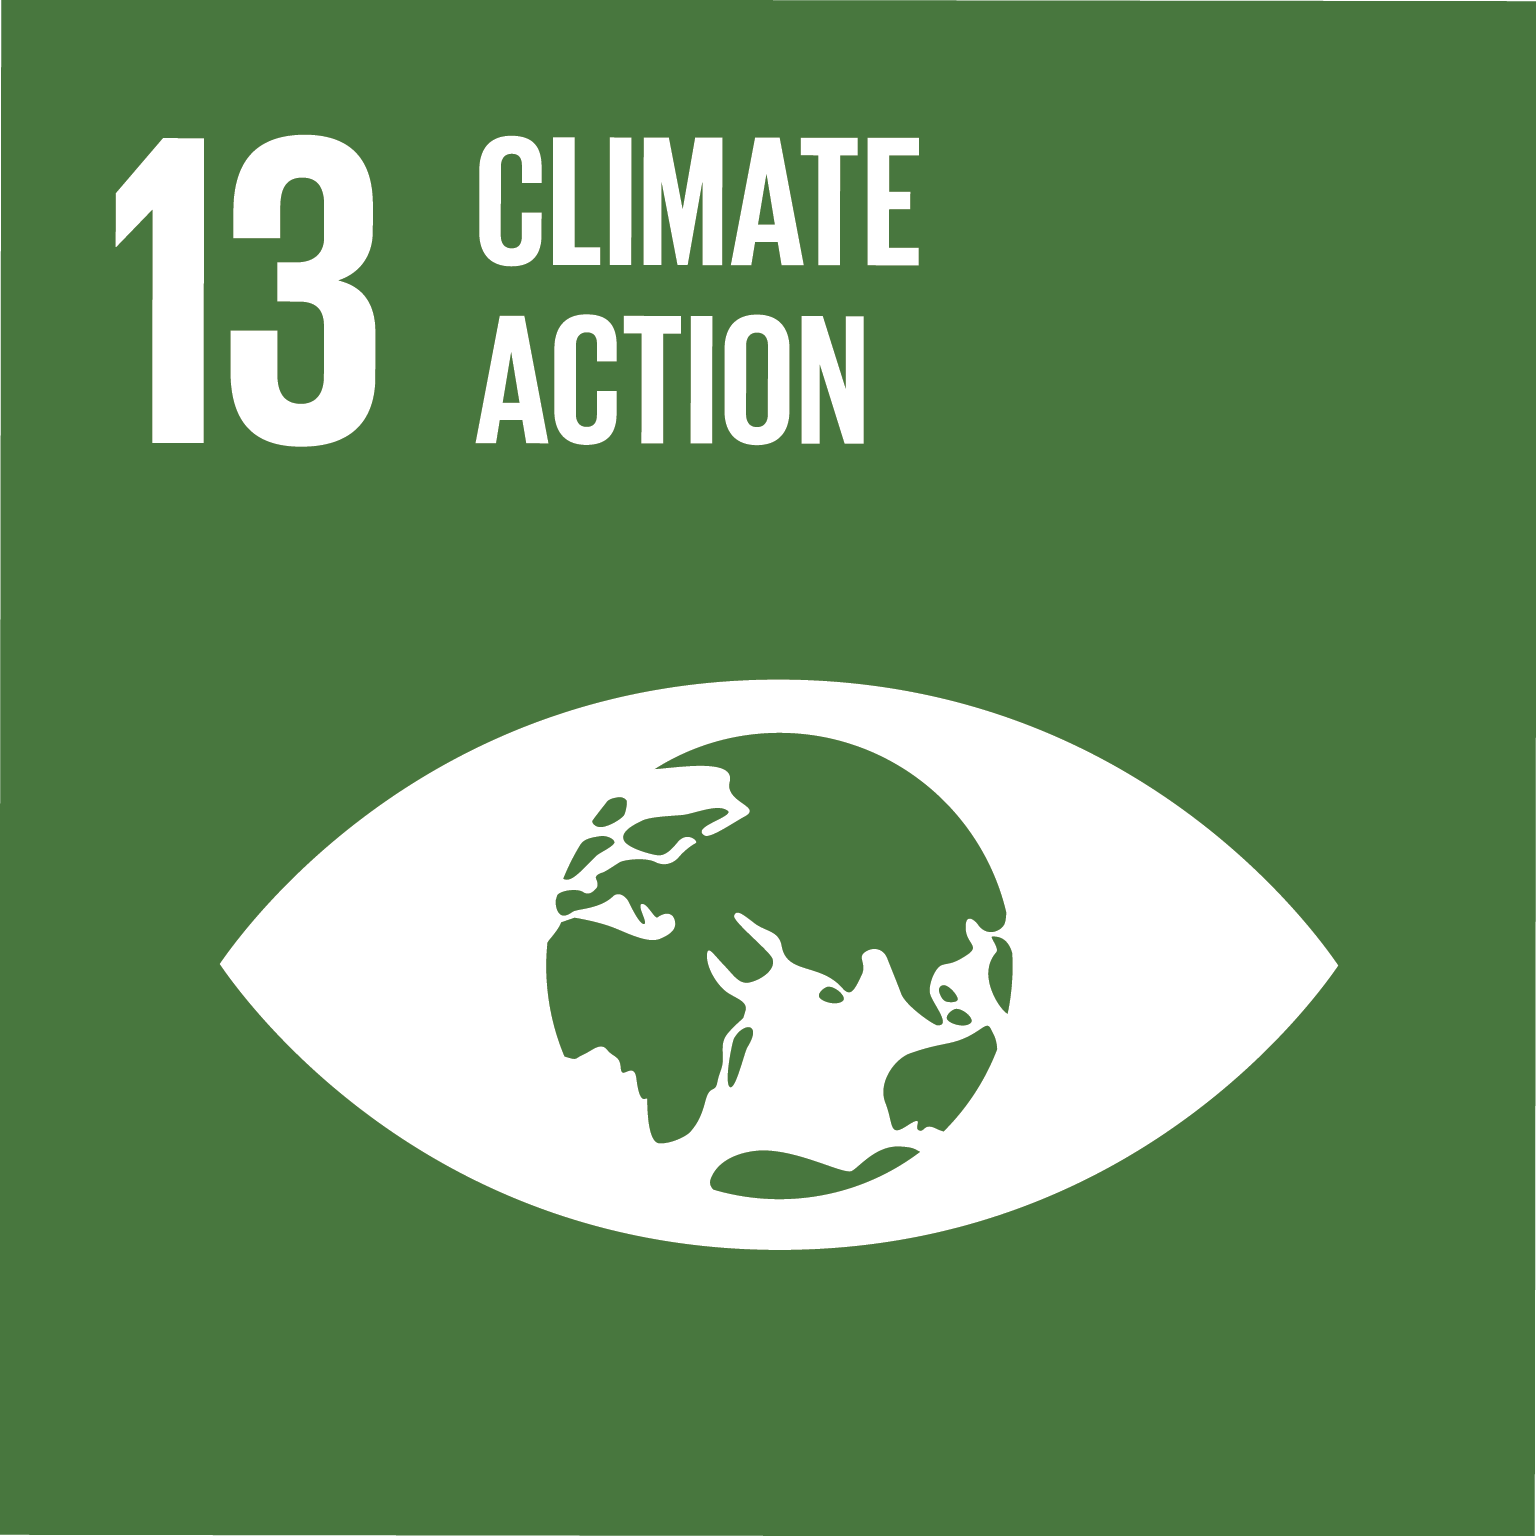 Goal 13: Climate Action - Take urgent action to combat climate change and its impacts